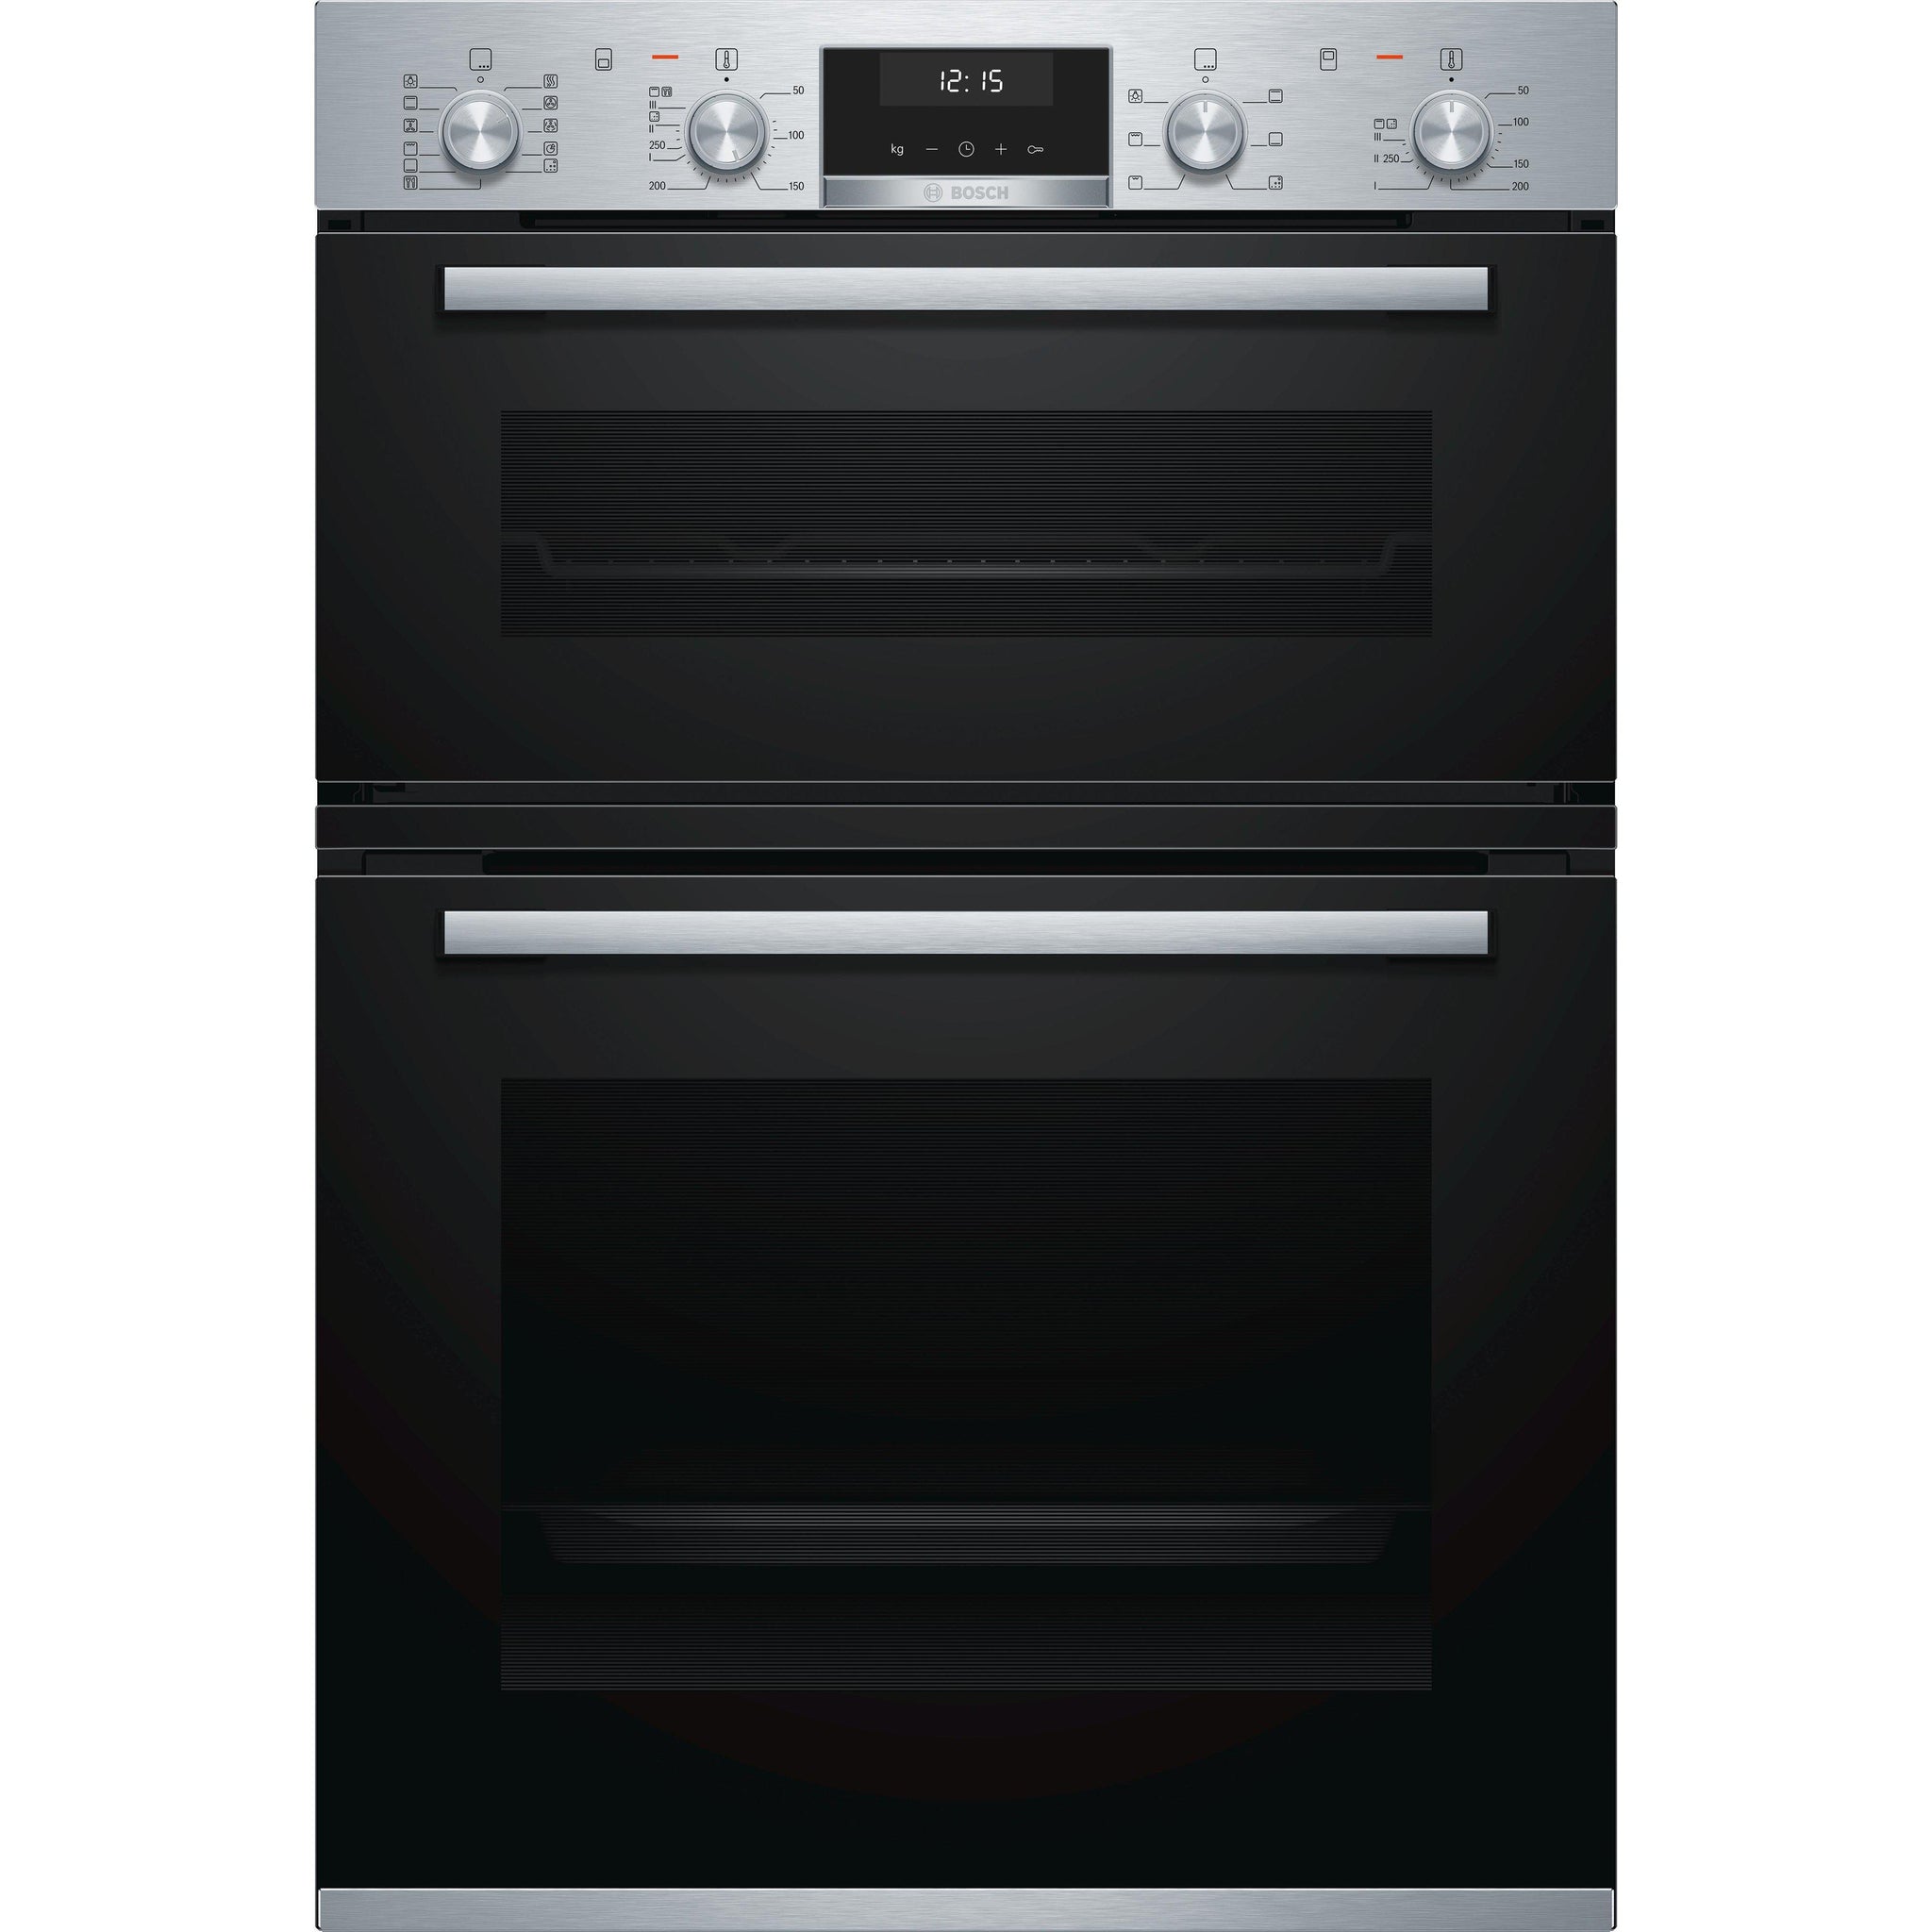 Bosch Series 6 Mba5575s0b Builtin Double Oven Stainless Steel